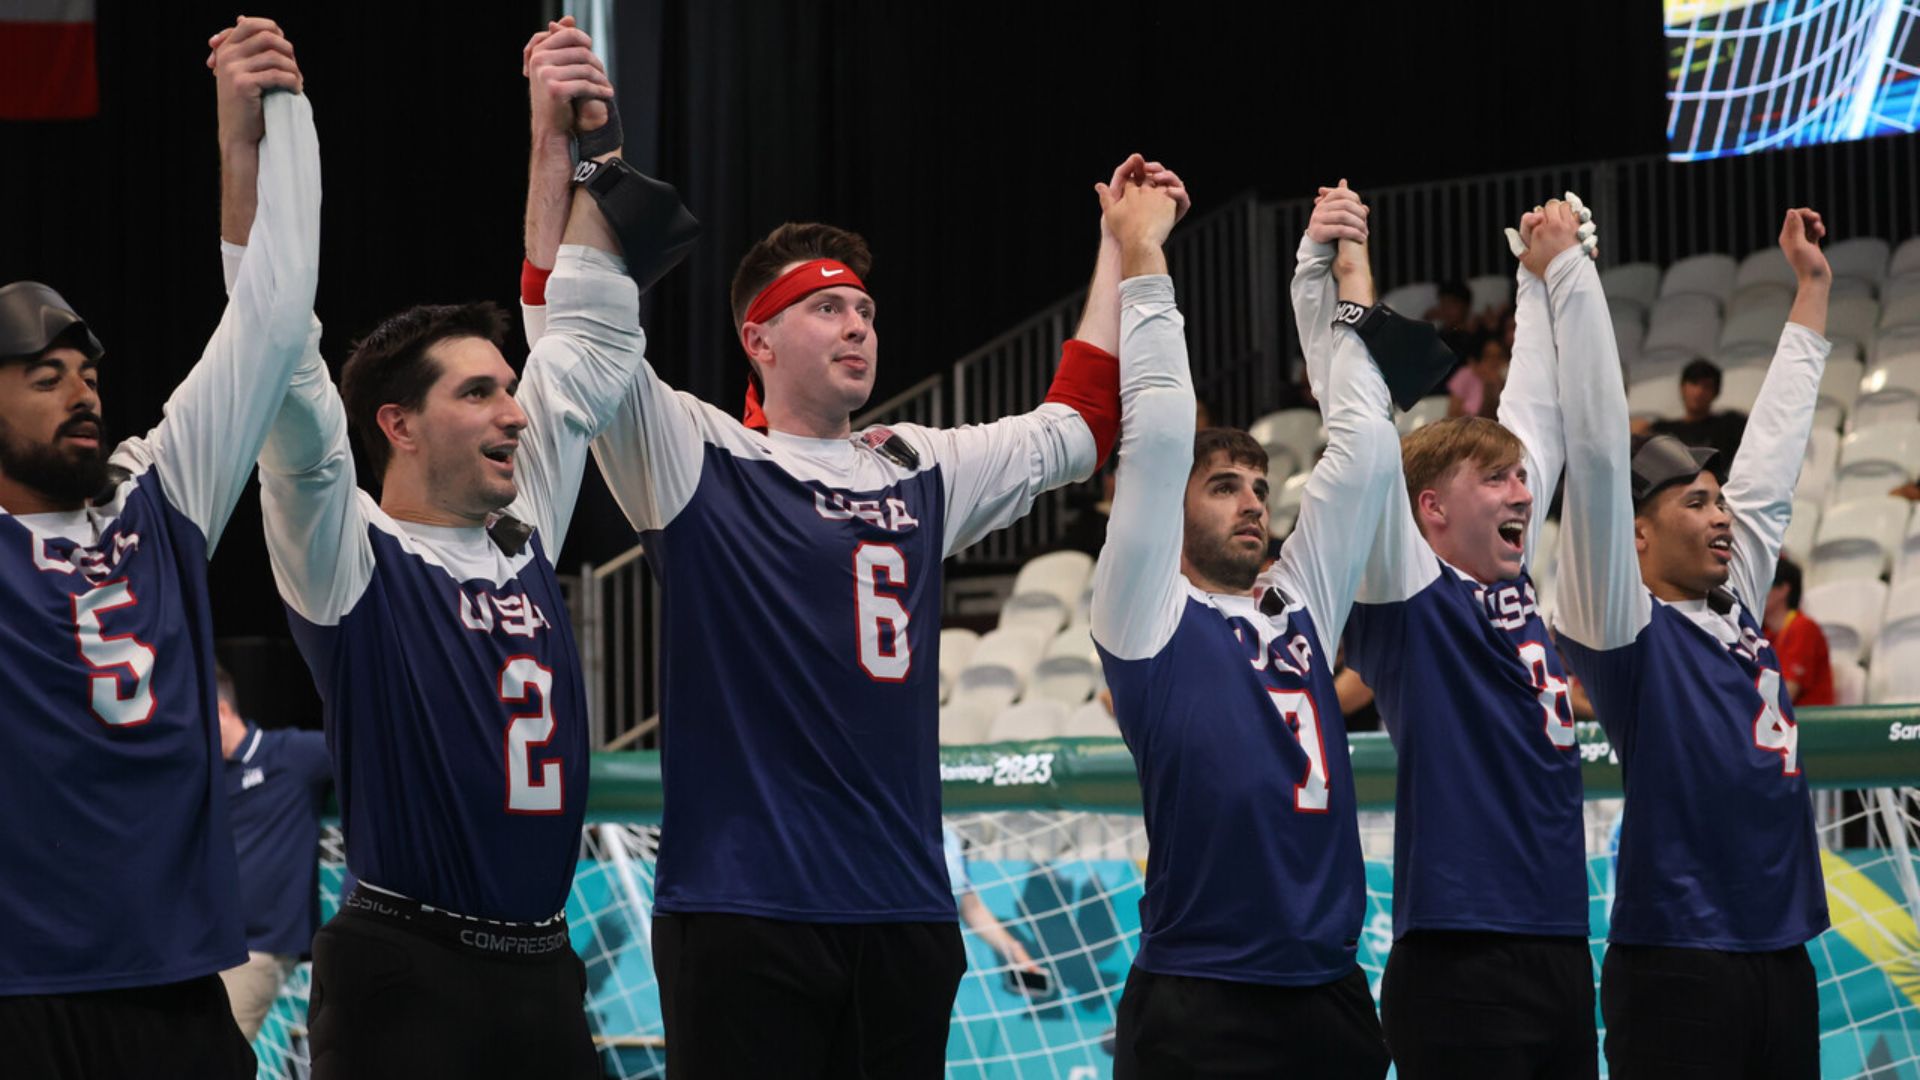 Goalball: United States Dominates Colombia, Advances to Semifinals